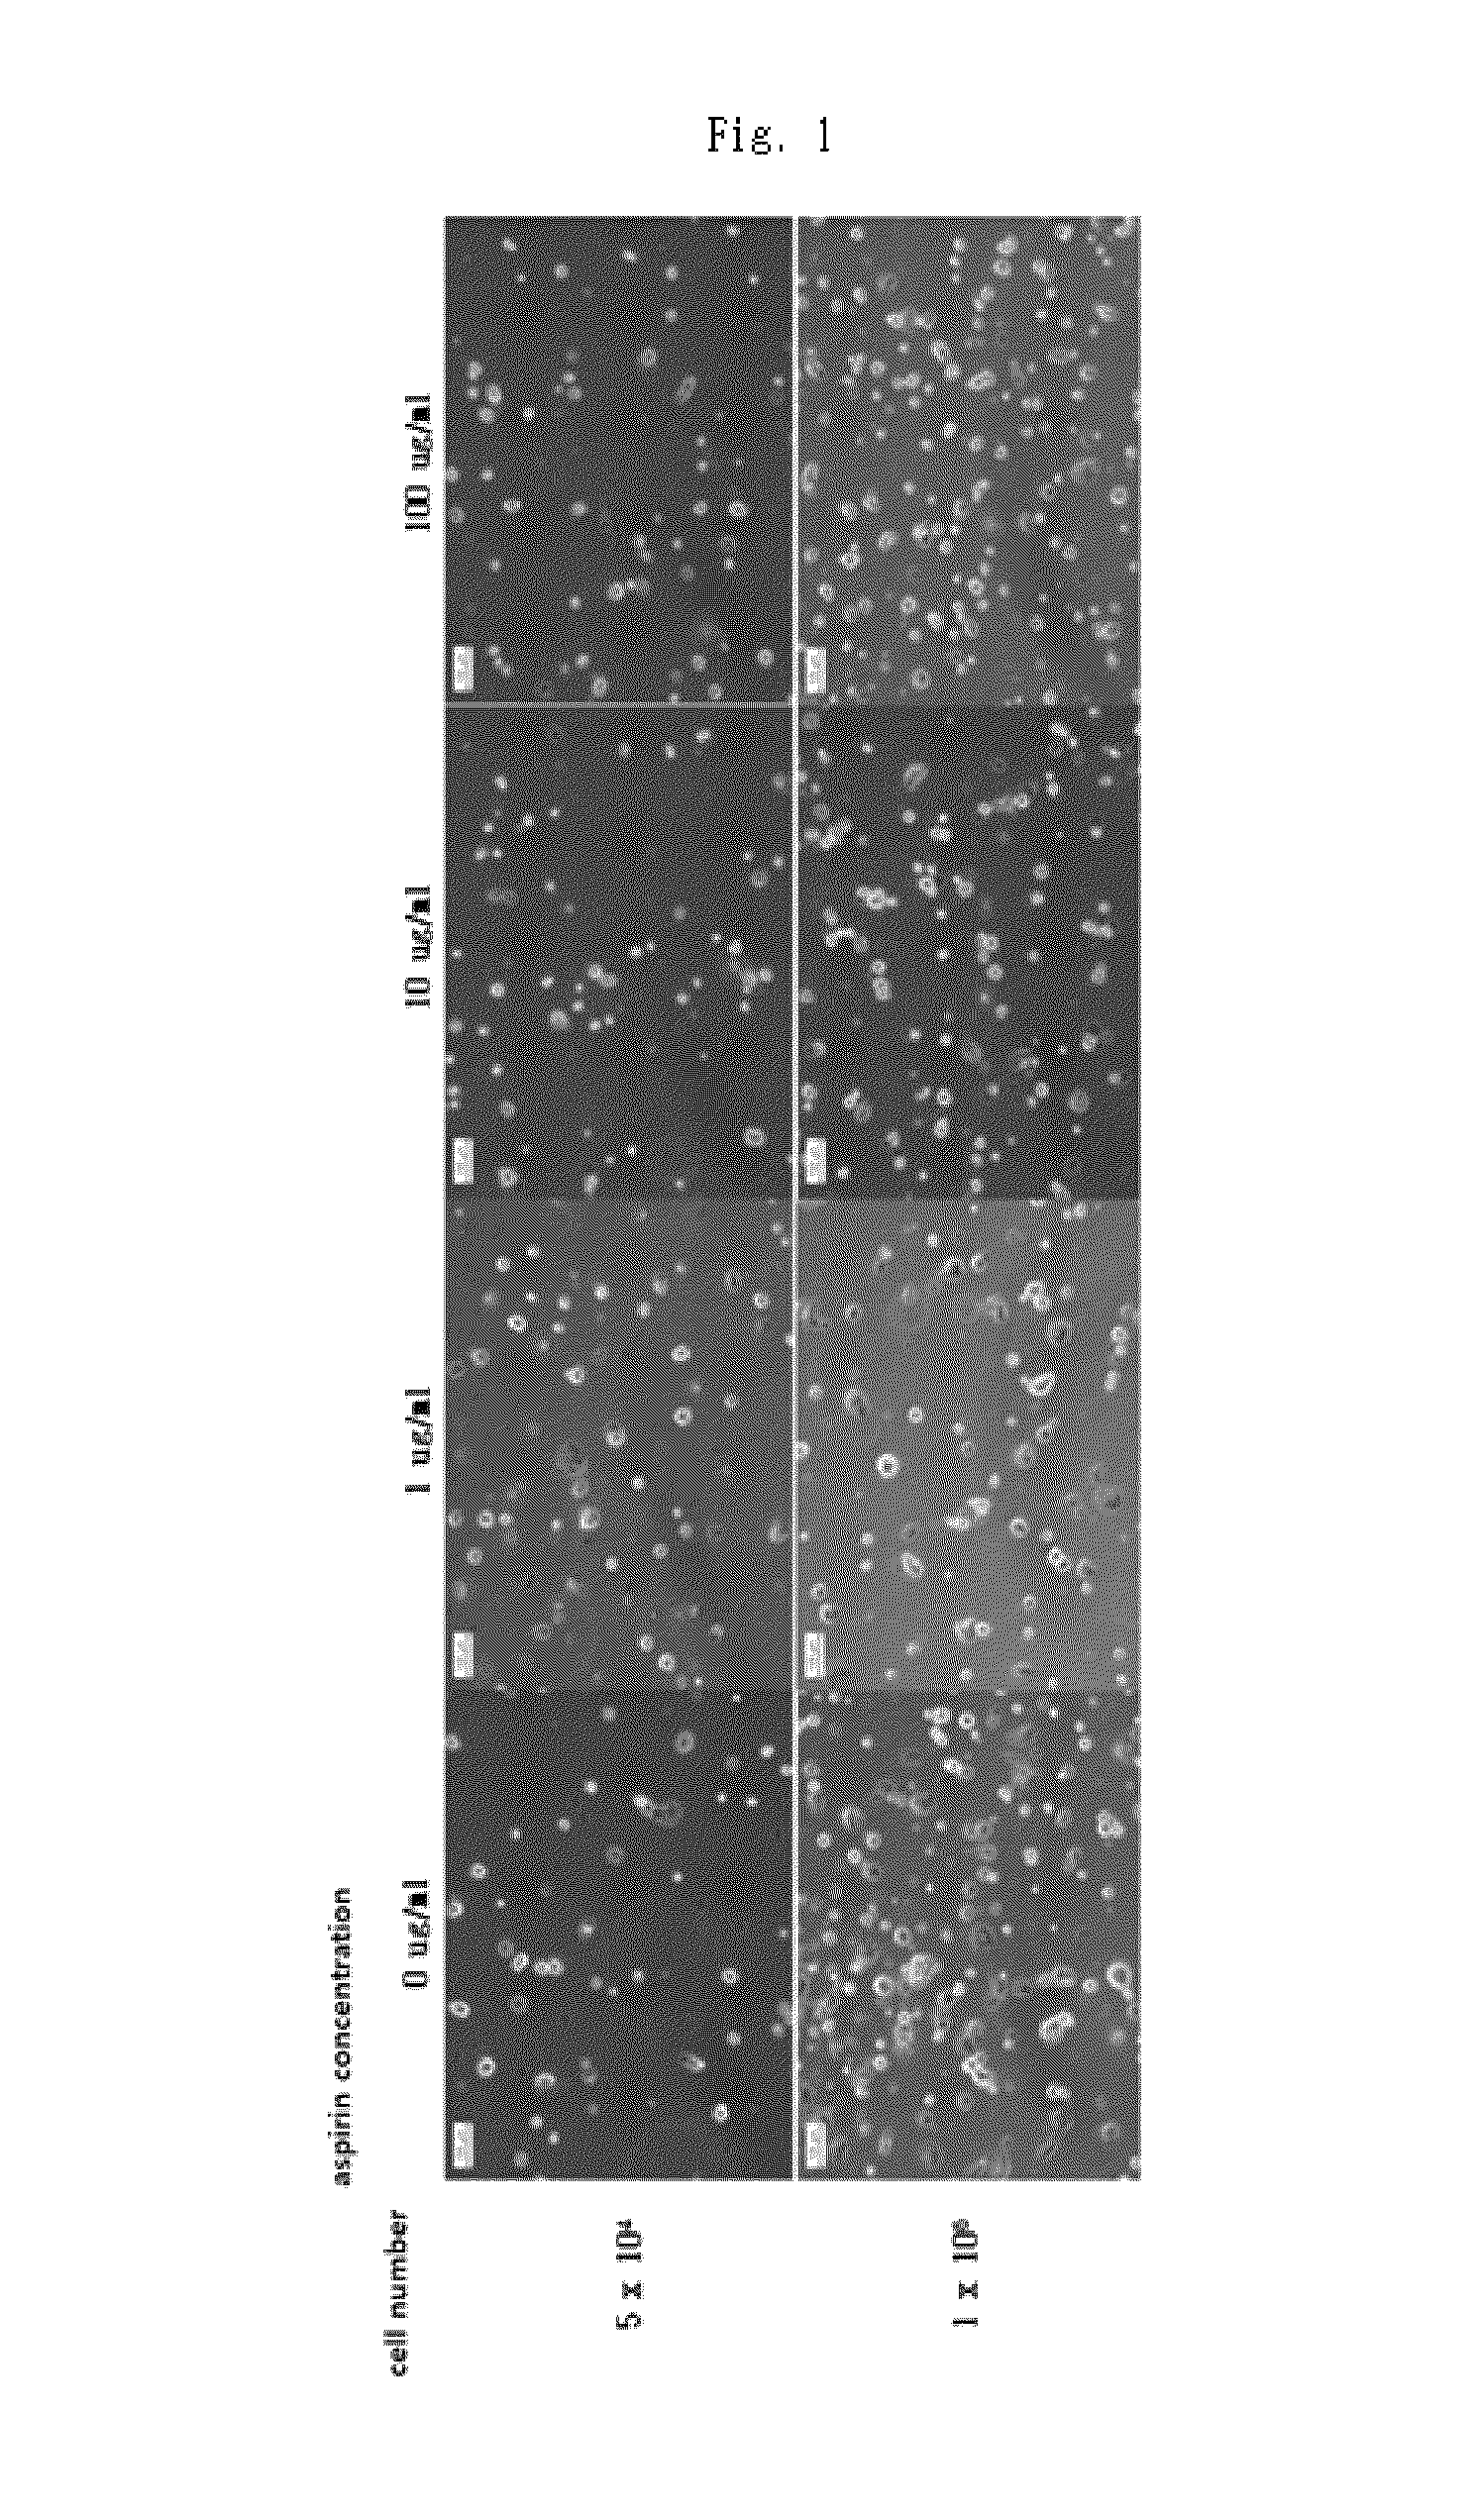 Method and composition for preventing stem cell disruption and aggregation